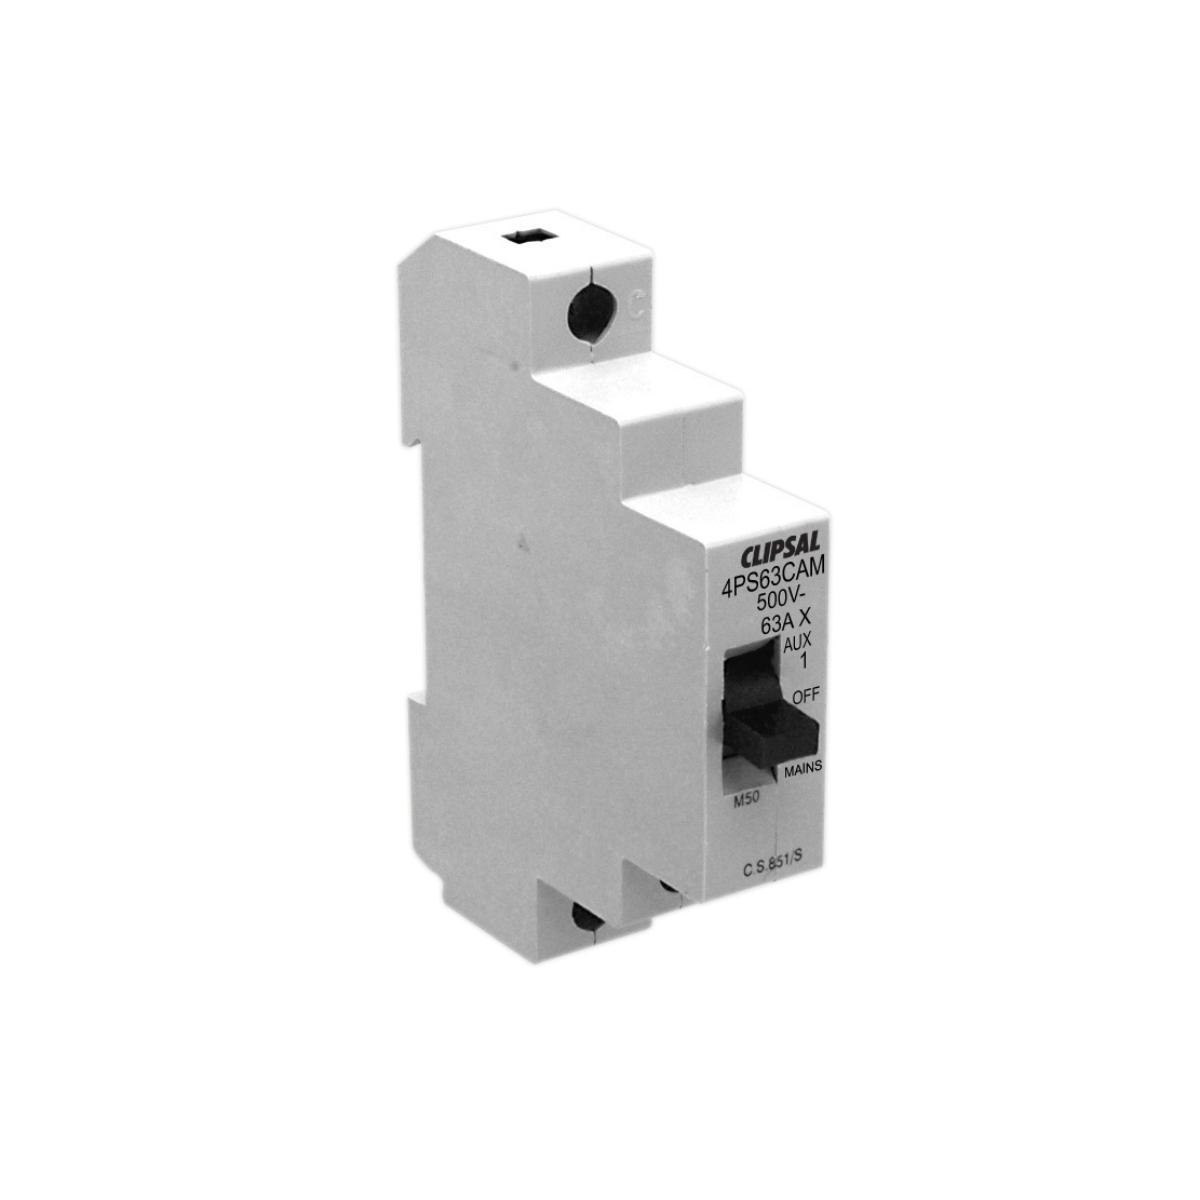 CHANGEOVER SWITCH DIN 63A 1P 1MOD A-O-M